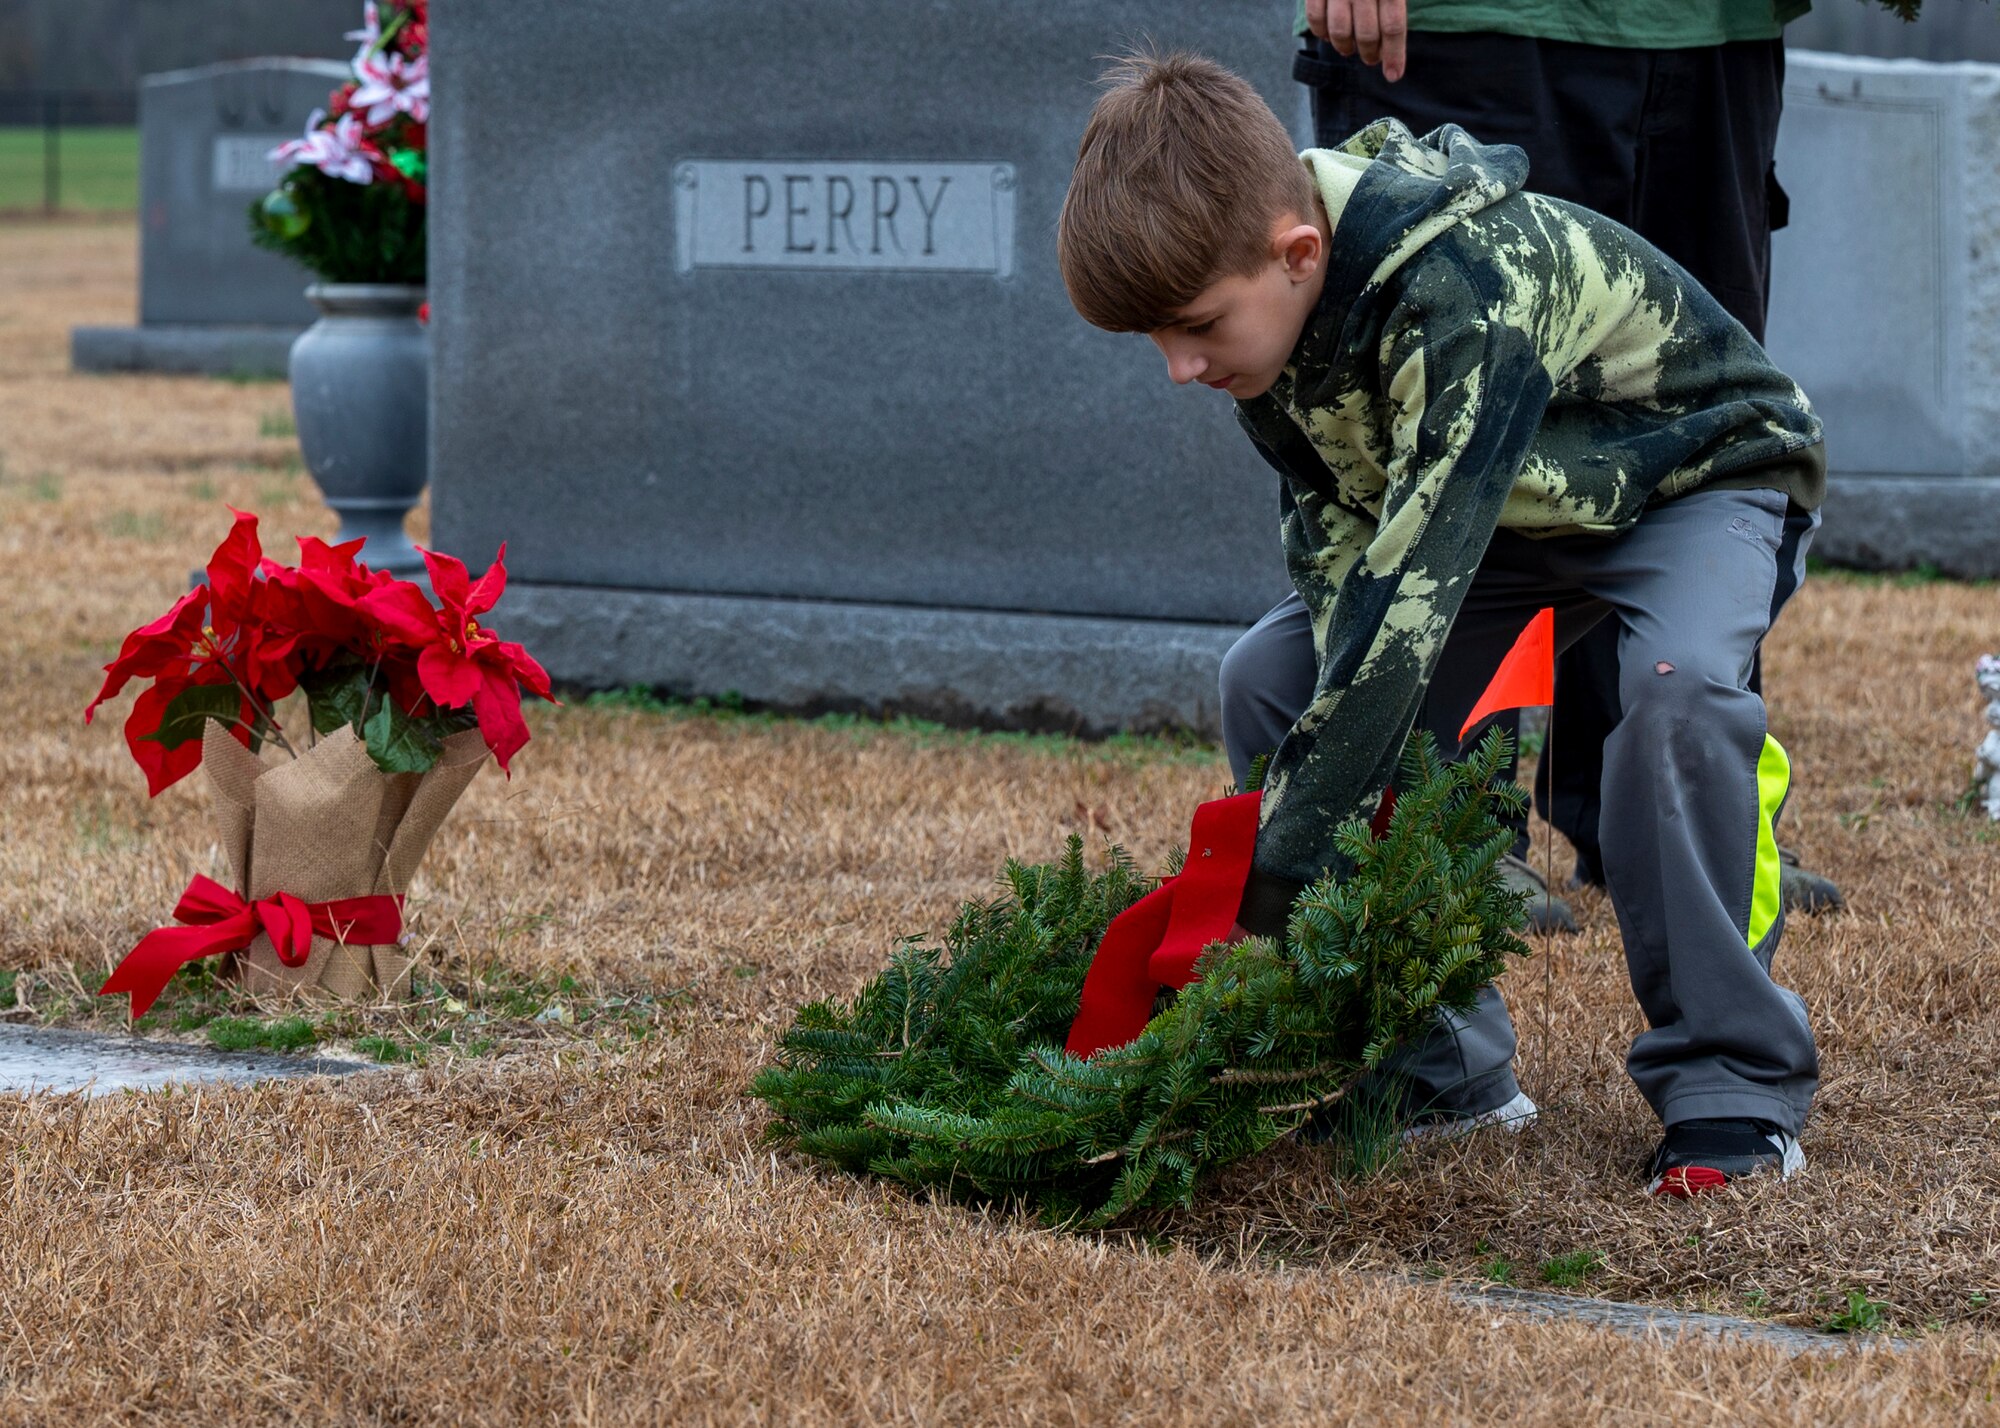 A member of the local community places a wreath at a headstone during the Wreaths Across America ceremony, at the Pikeville Cemetery in Pikeville, North Carolina, Dec. 19, 2021.